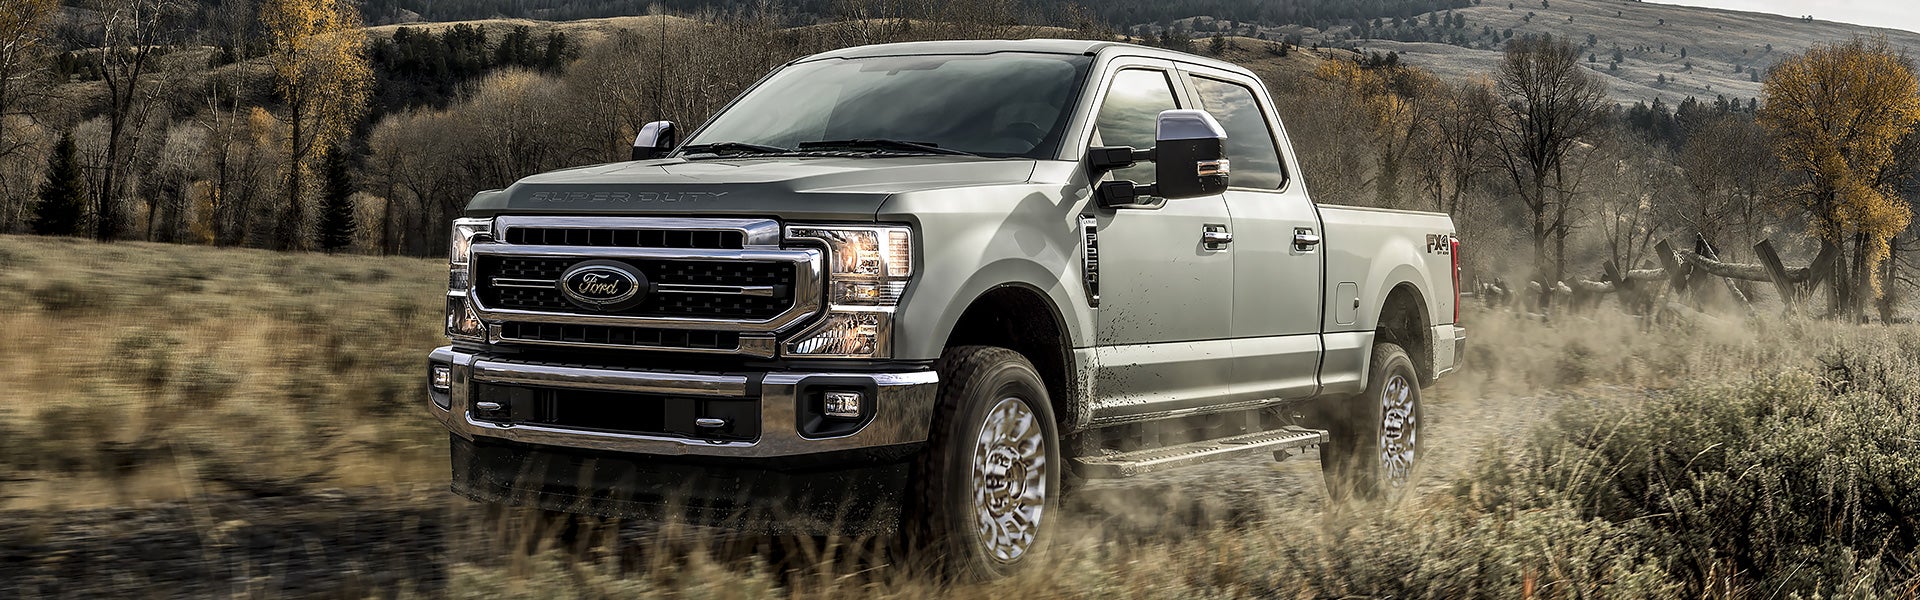 2020 Ford Super Duty®